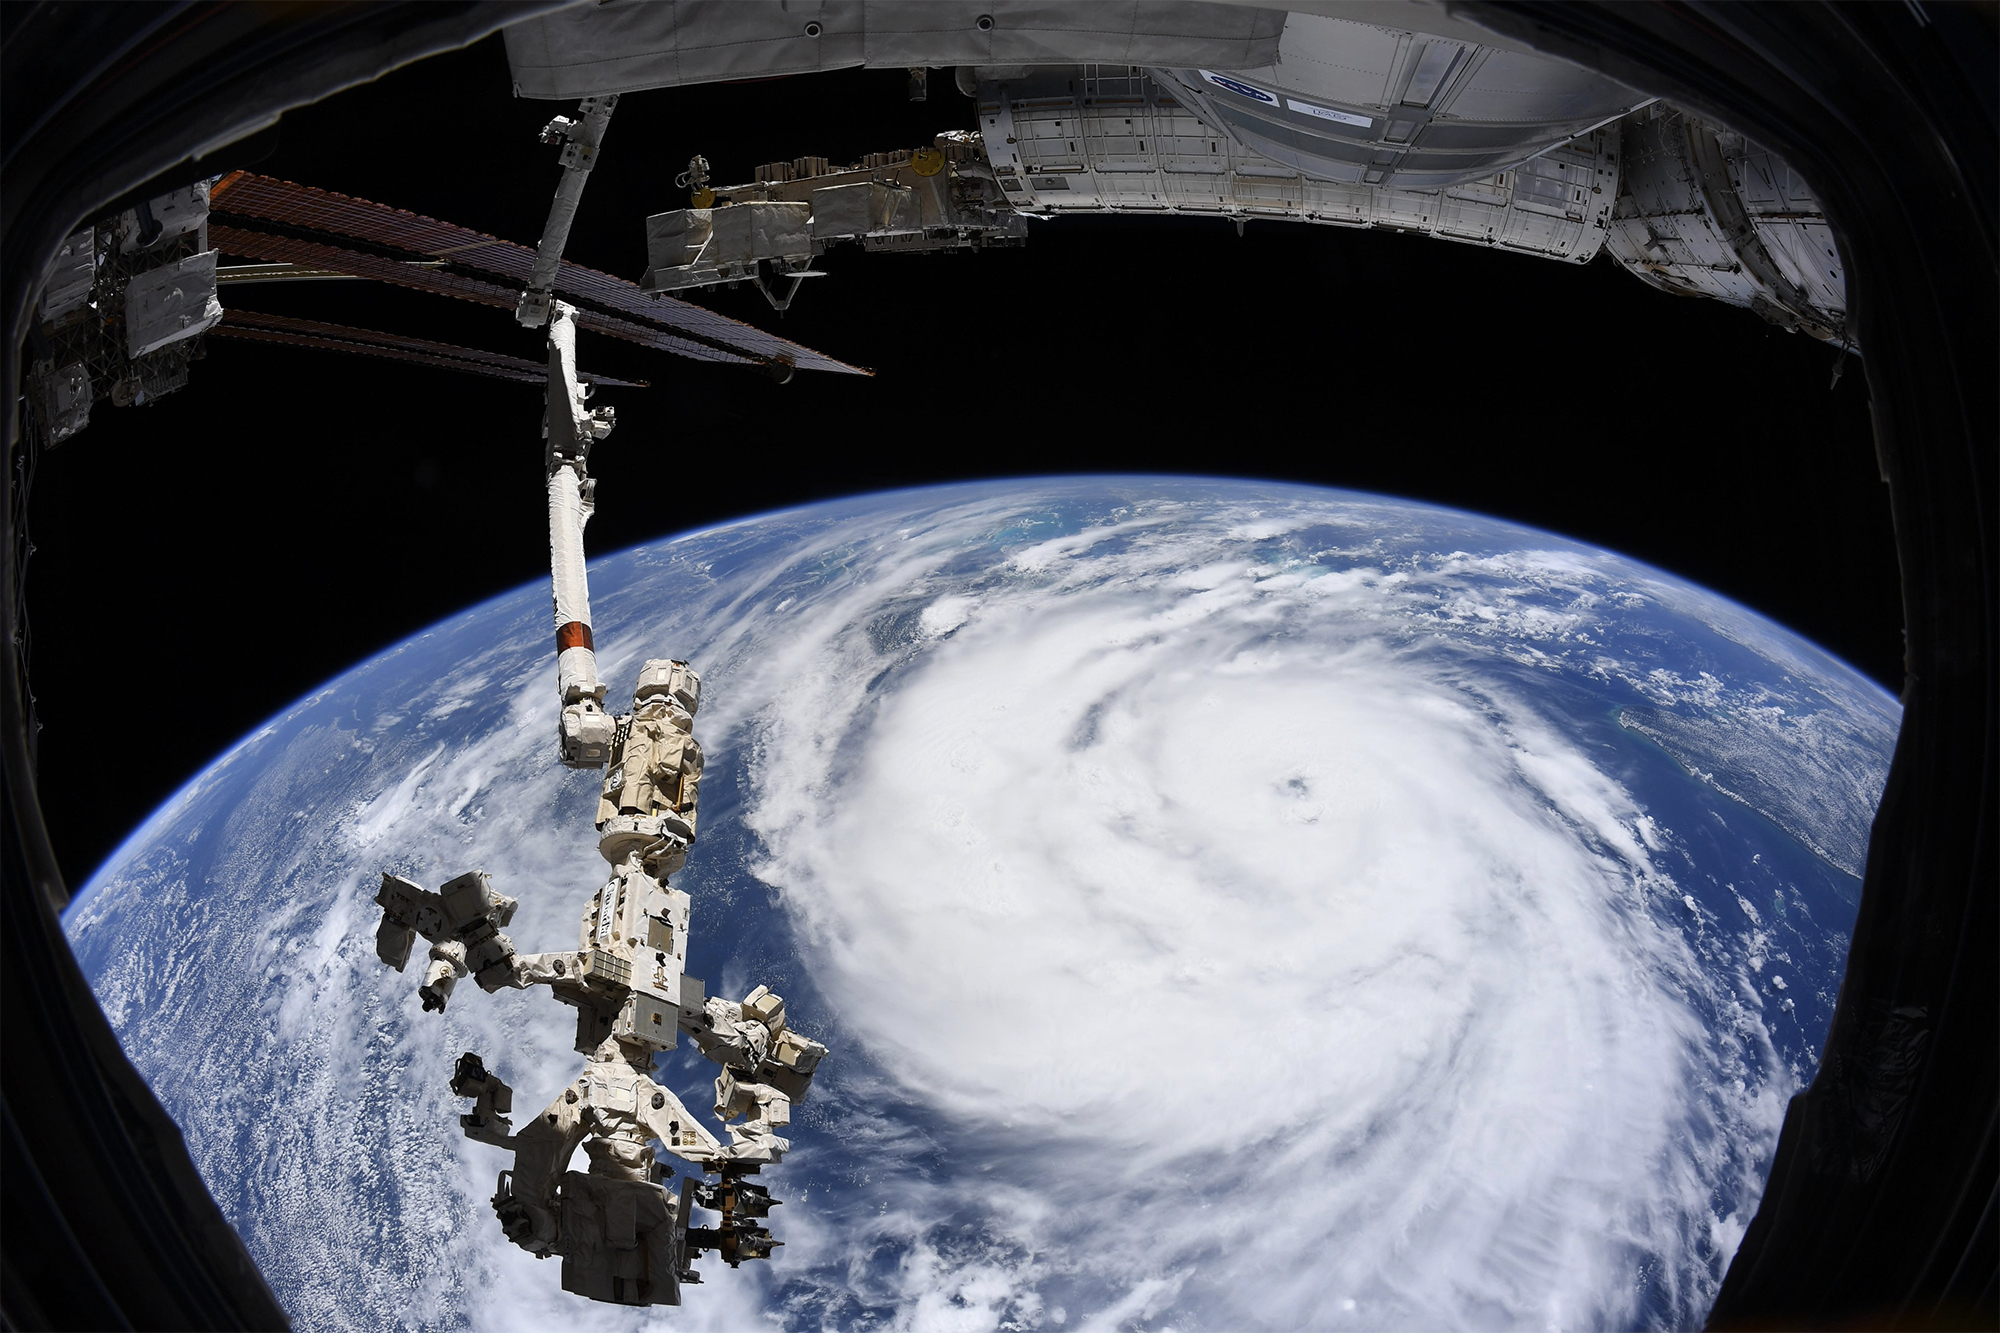 View of Hurricane Ida from space with NASA satellite visible above orbit.